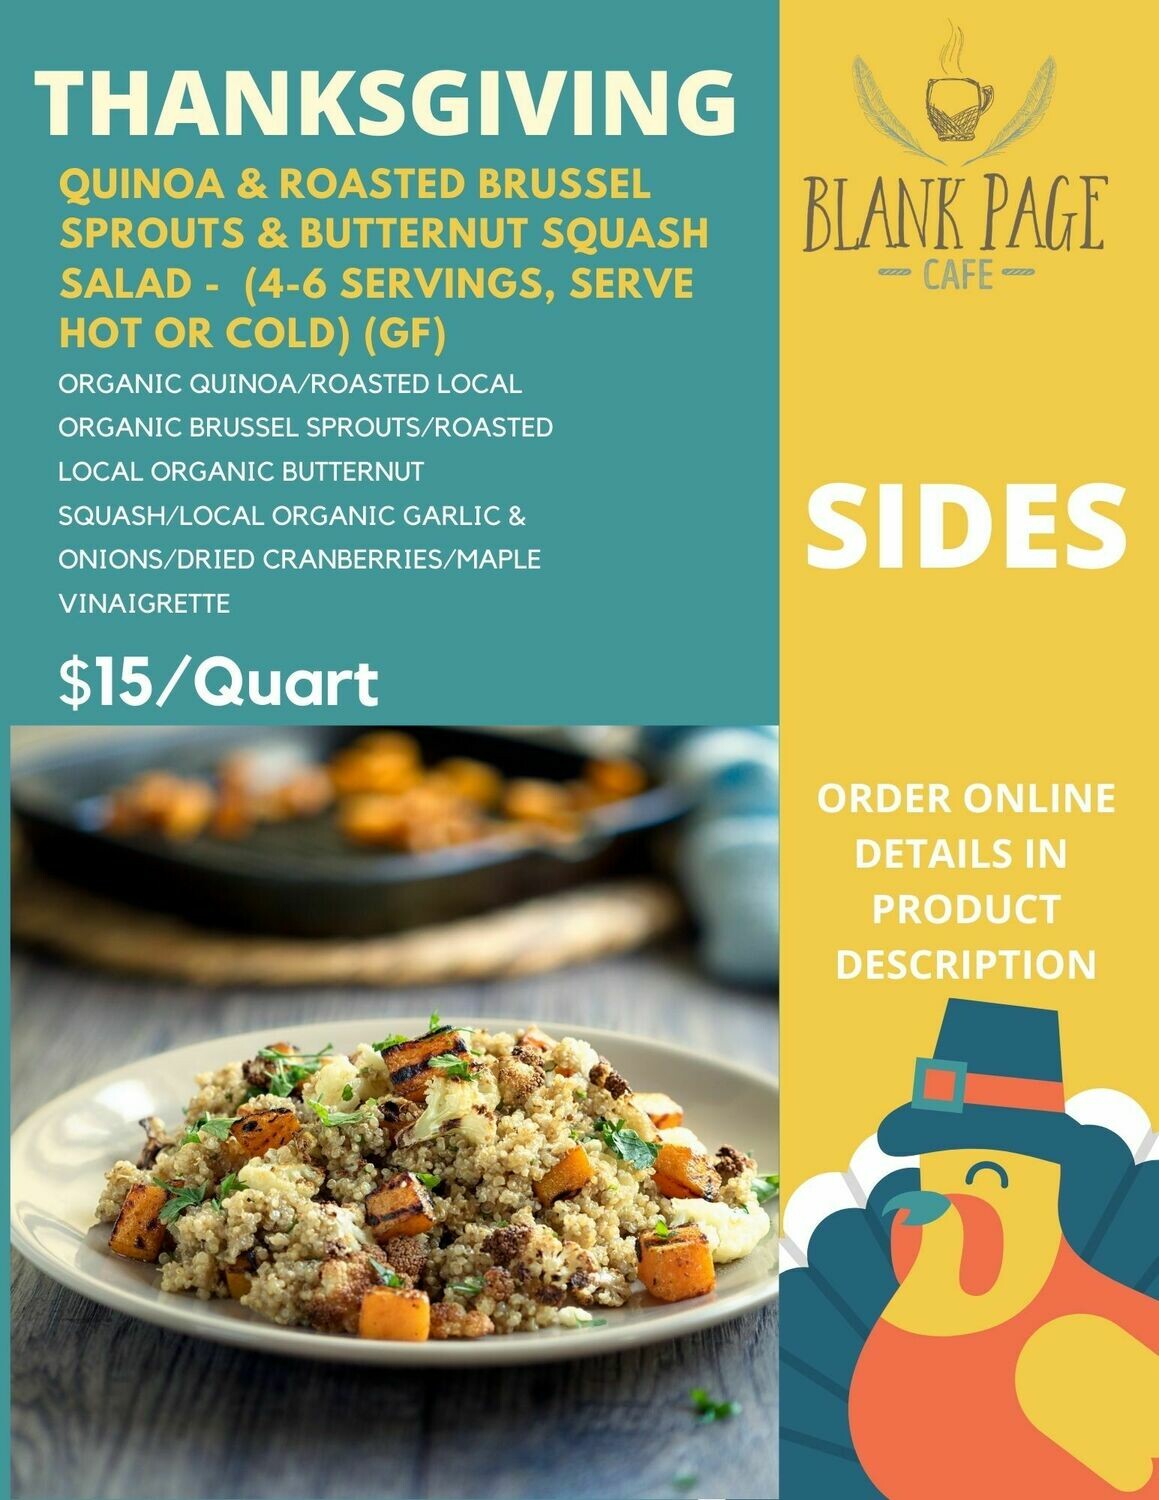 Thanksgiving side#3 - Quinoa + Roasted Brussel Sprouts + Roasted Butternut Squash Salad